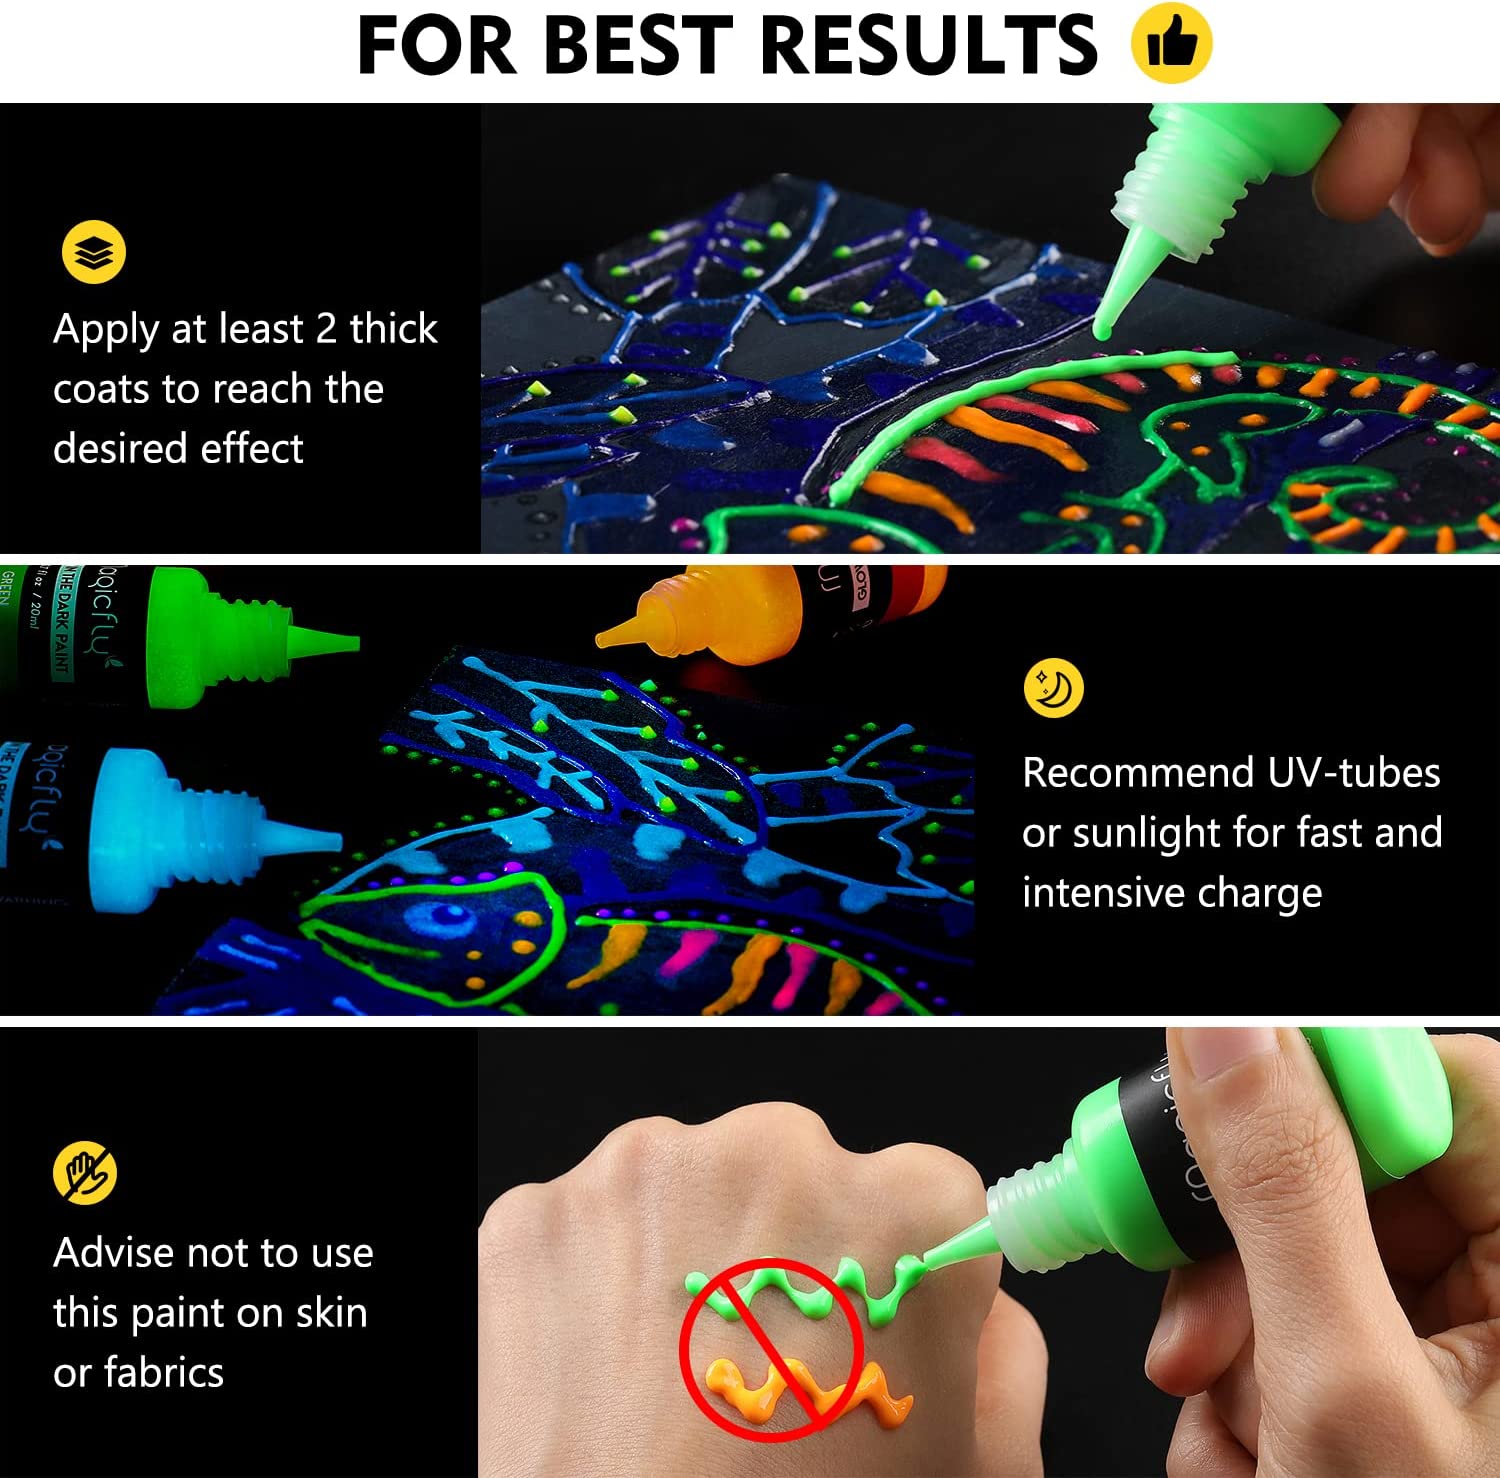 Magicfly Glow in The Dark Paint